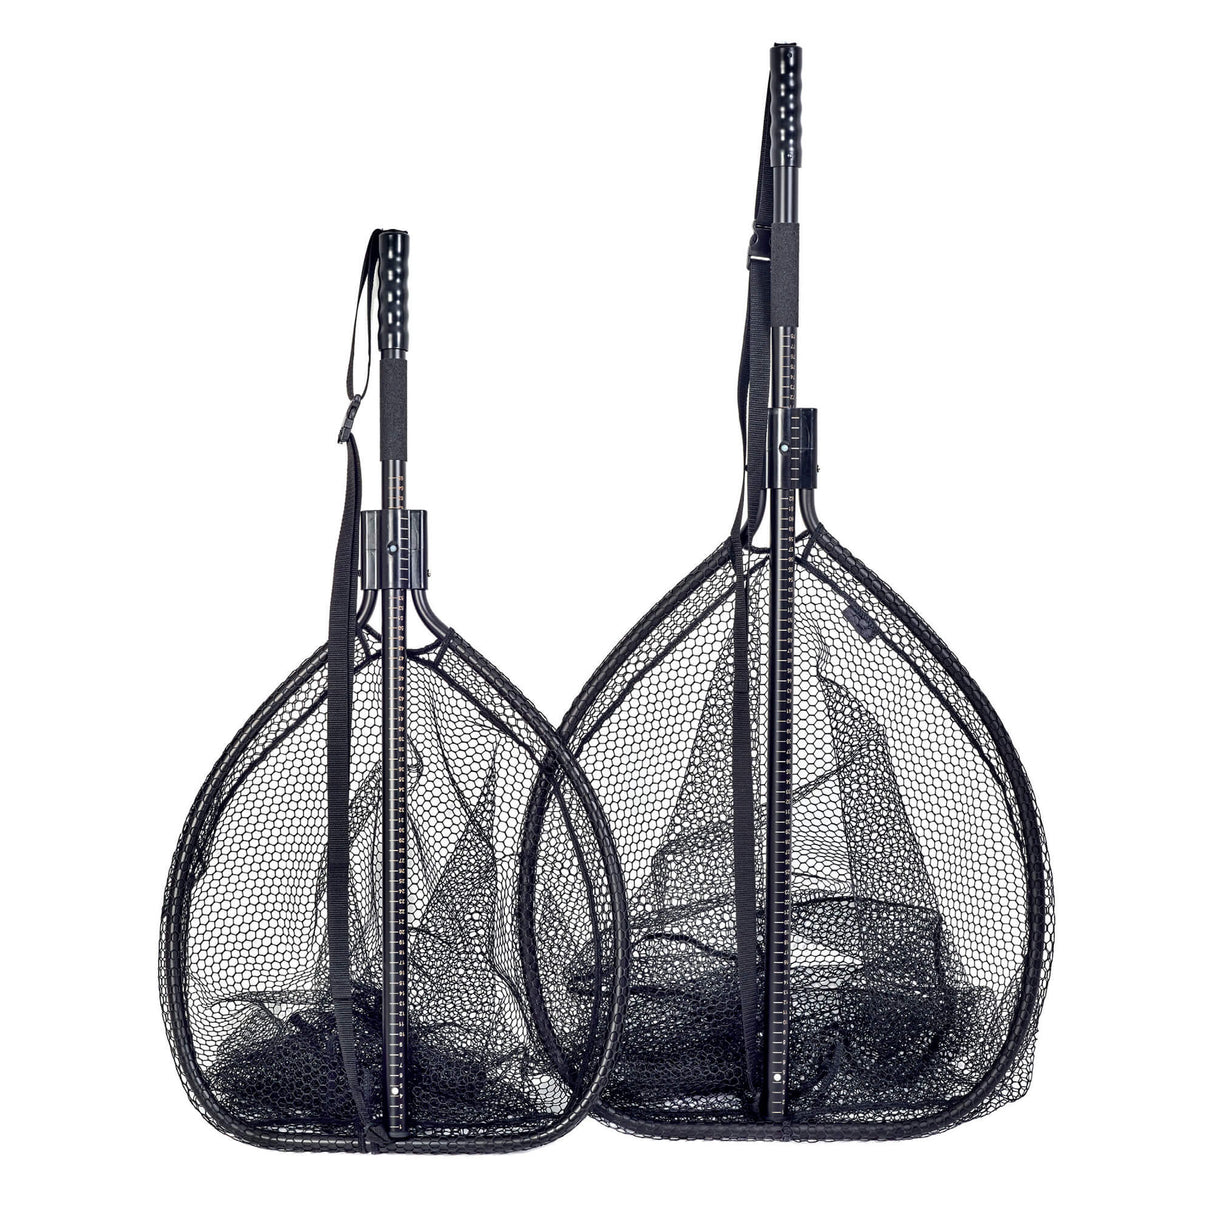 Saltwater Measure and Weight Landing Nets – Fly and Flies